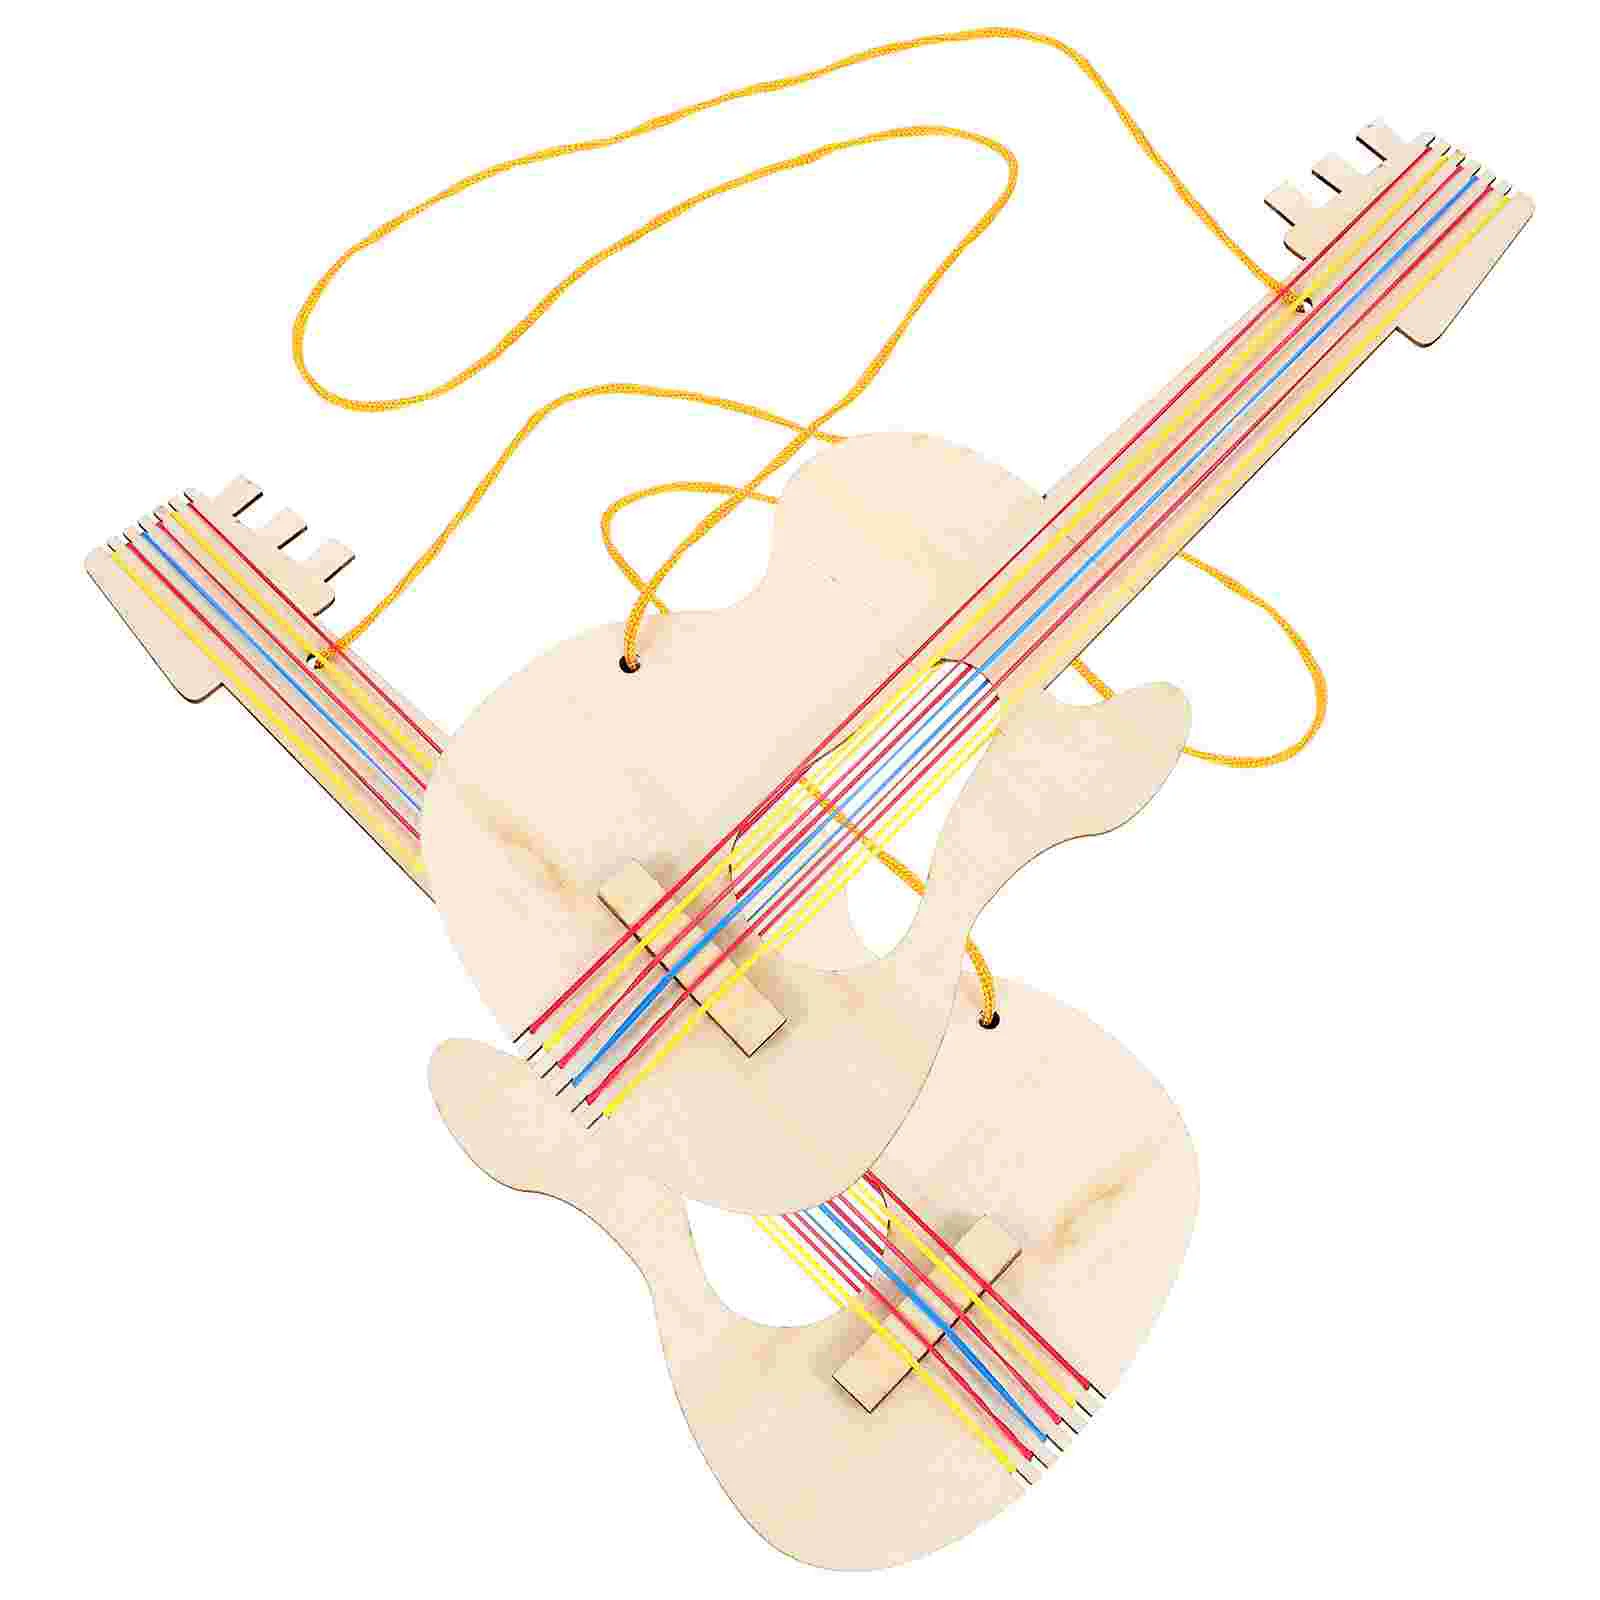 

Kid Guitars Wooden Guitar Handmade DIY Crafts Unfinished Toy Graffiti Cutout For Kids Models